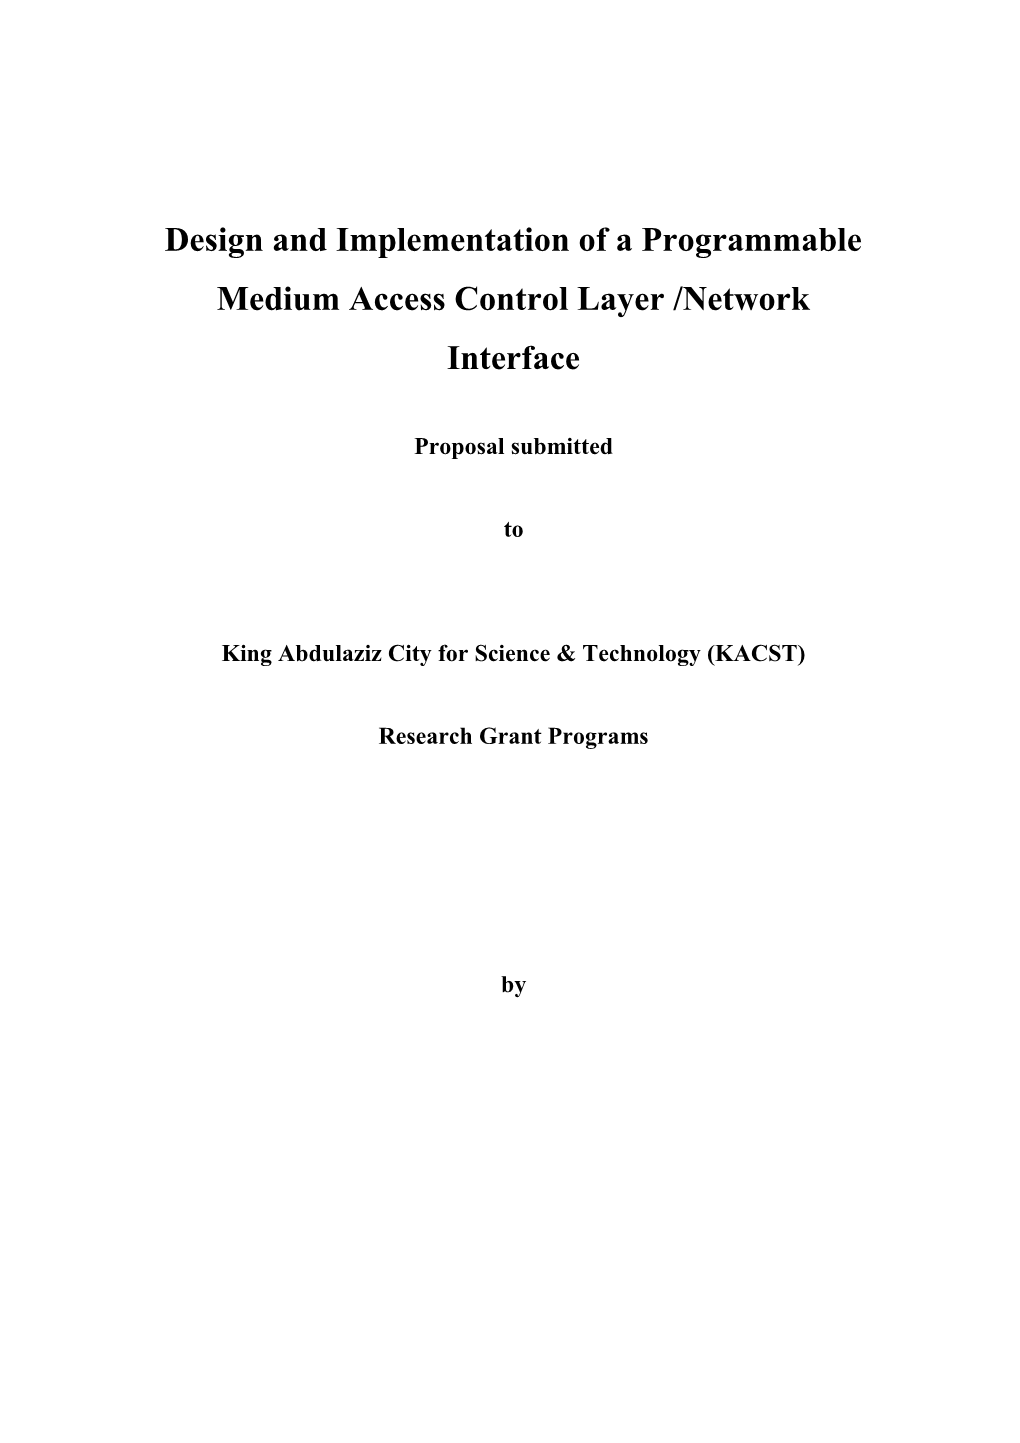 Design and Implementation of a Programmable Medium Access Control Layer /Network Interface